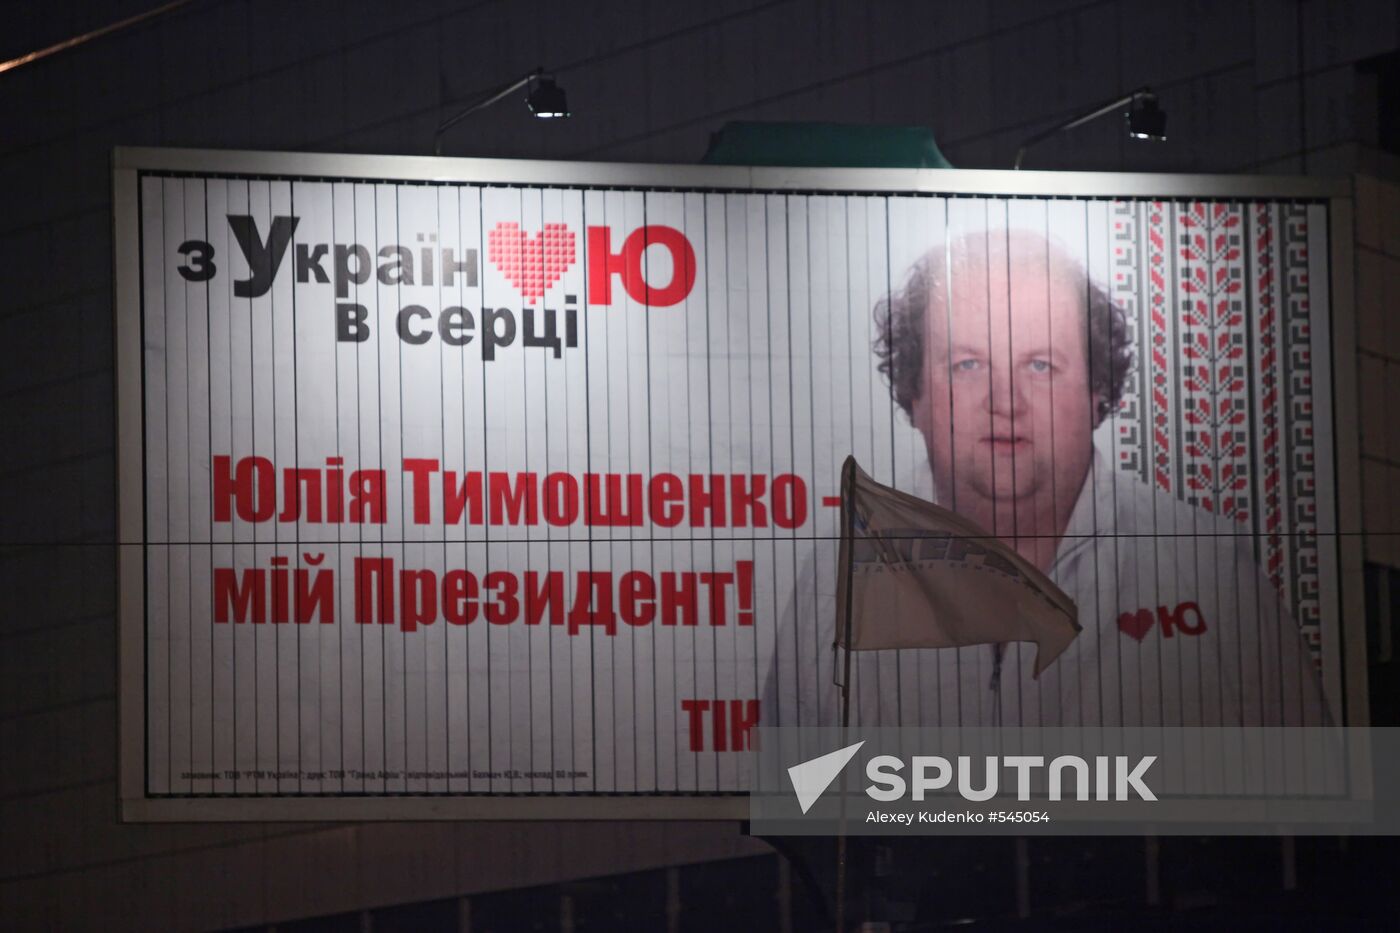 Election-campaign posters in Kiev